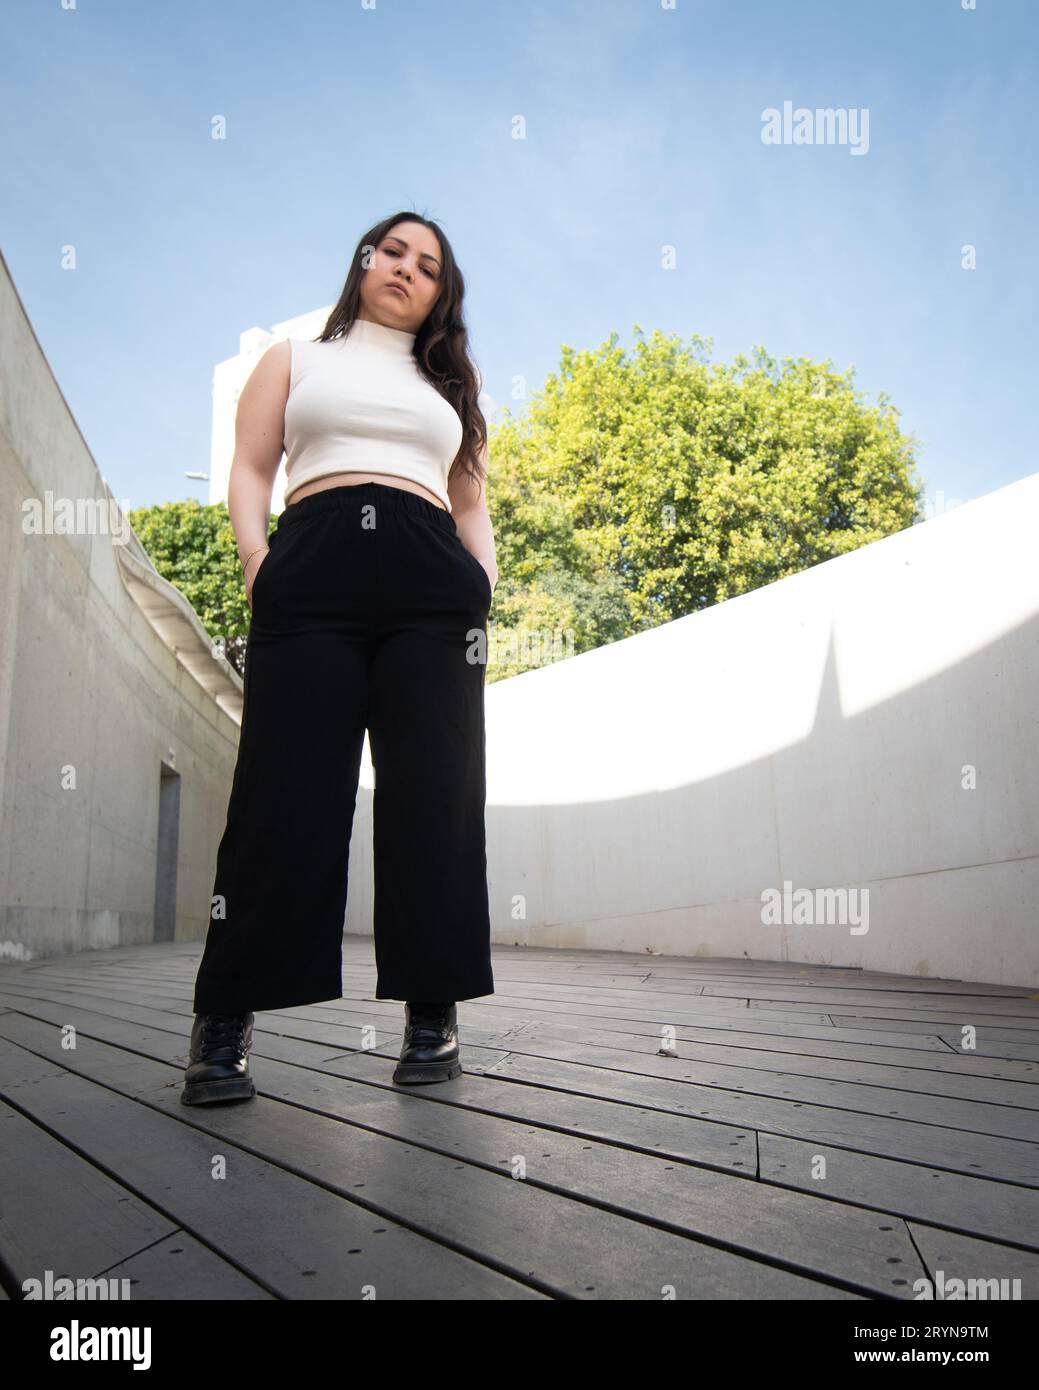 Young attractive woman wearing casual clothing posing outdoors in the city Stock Photo